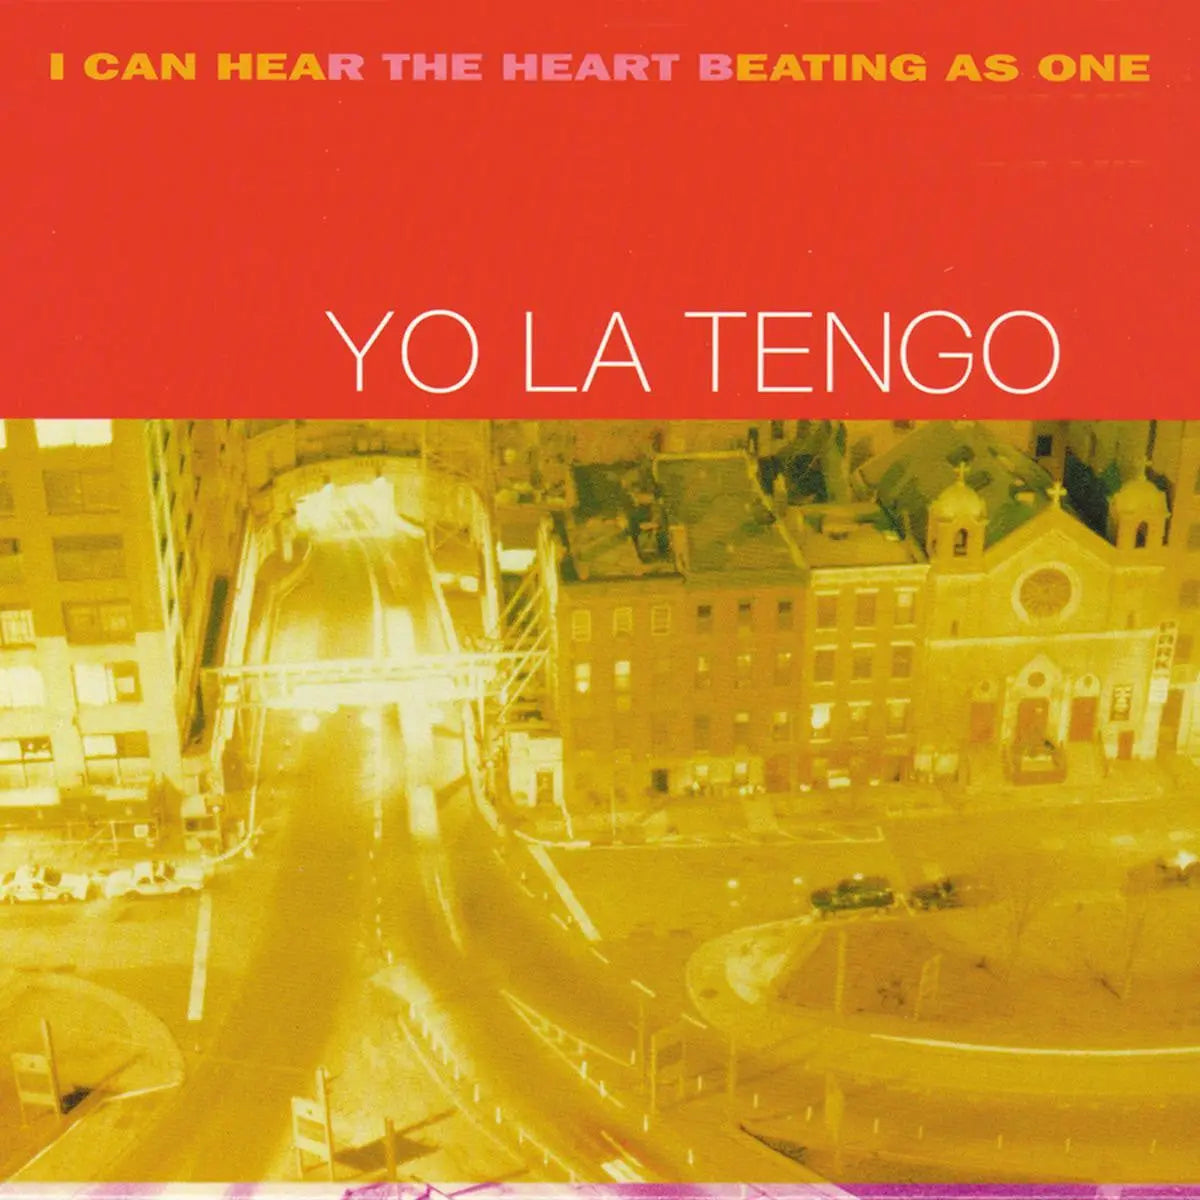 Yo La Tengo - I Can Hear The Heart Beating As One (25th Anniversary) [Yellow Colored Vinyl 2LP, Limited]